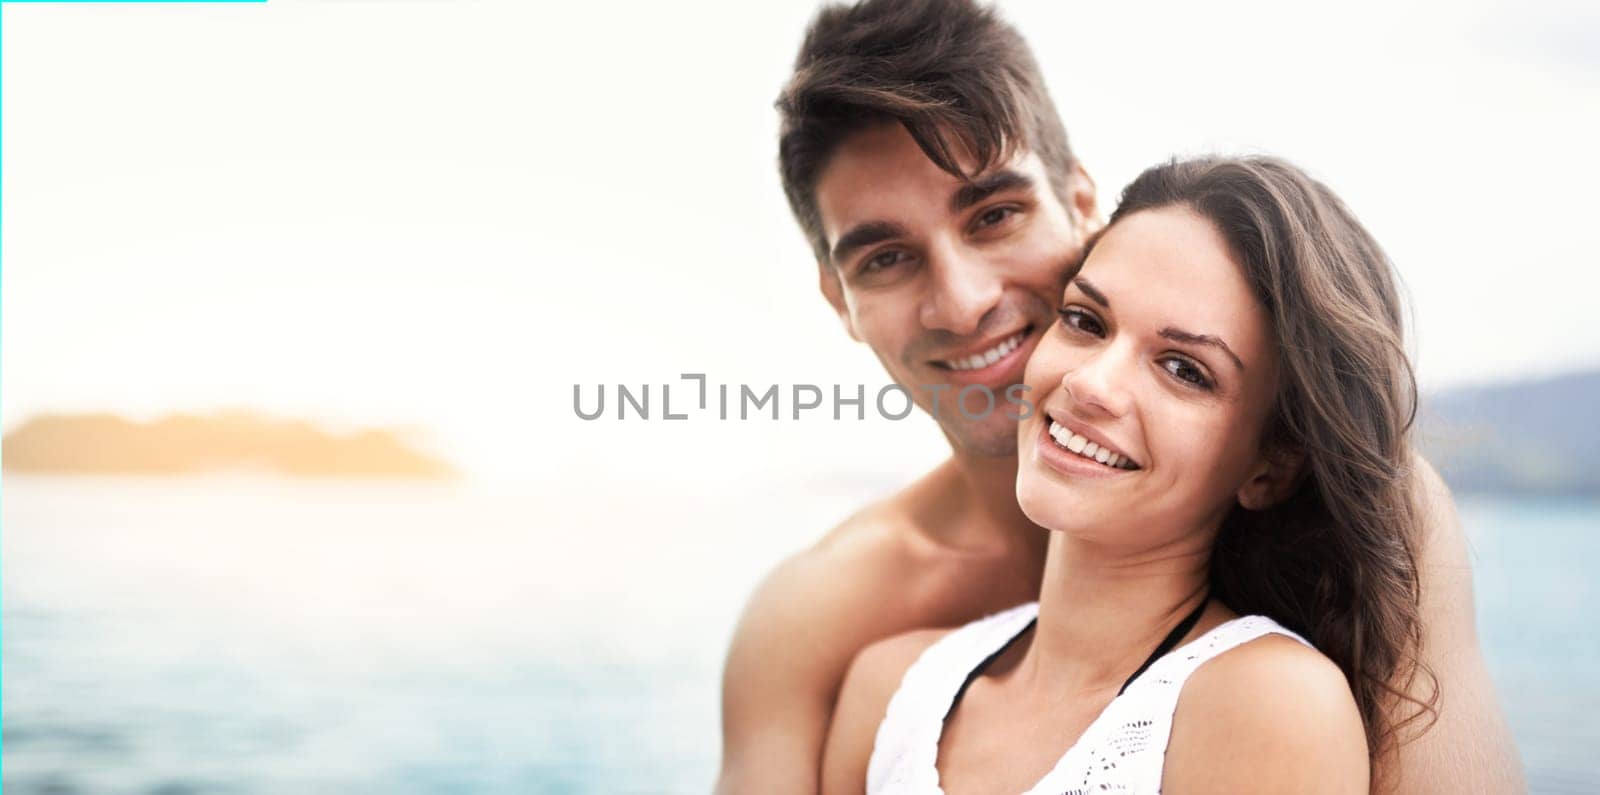 Love, portrait and happy couple at beach with care, security and bonding on vacation together. Nature, summer or young people or fun at sea for travel, holiday or adventure on romantic date in Spain.